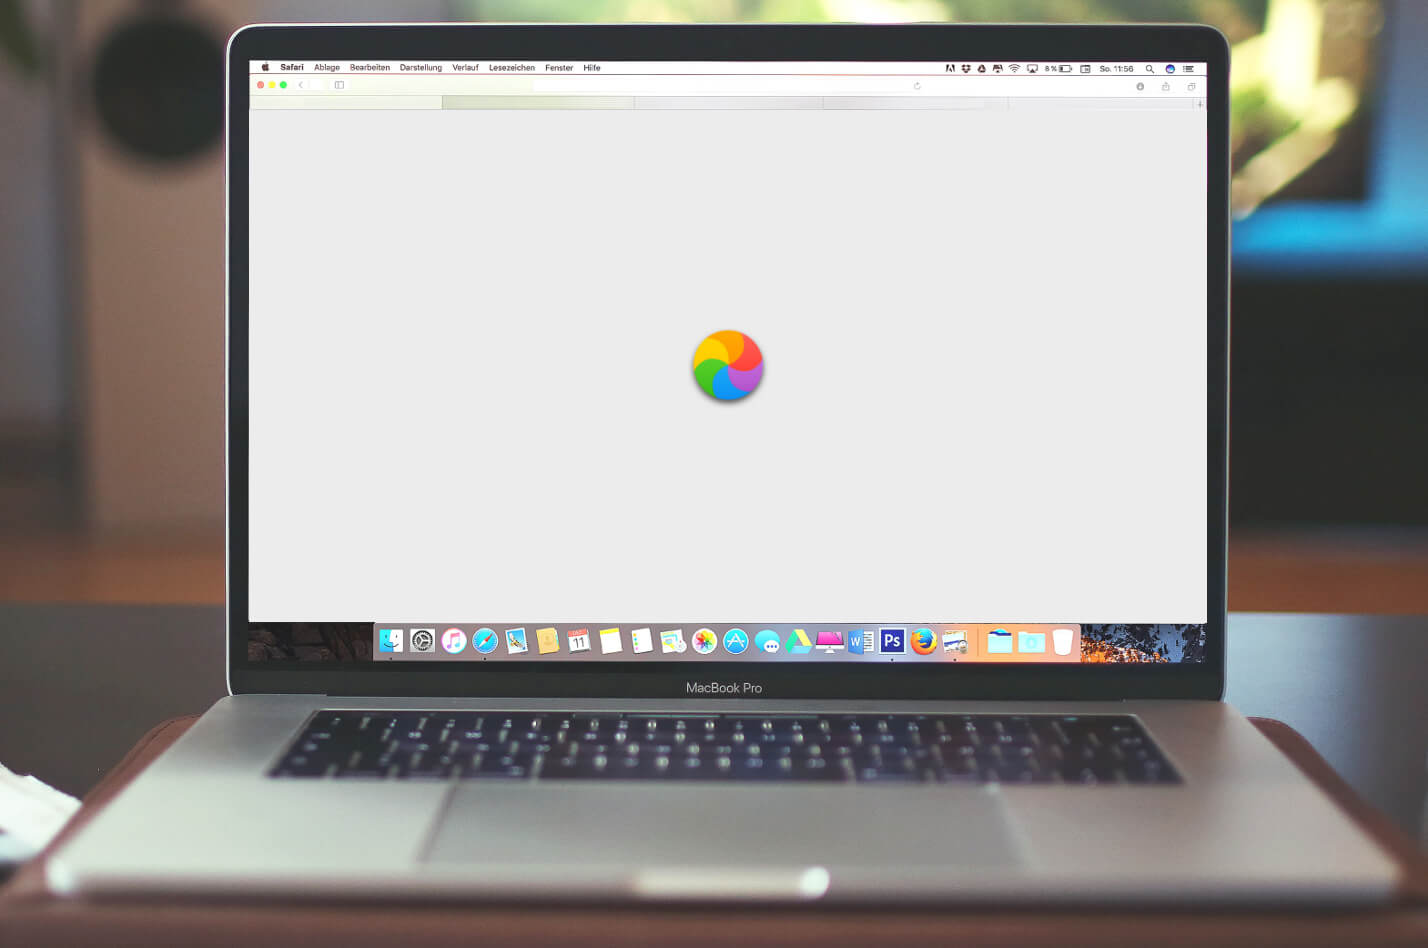 How to stop spinning color wheel on Mac